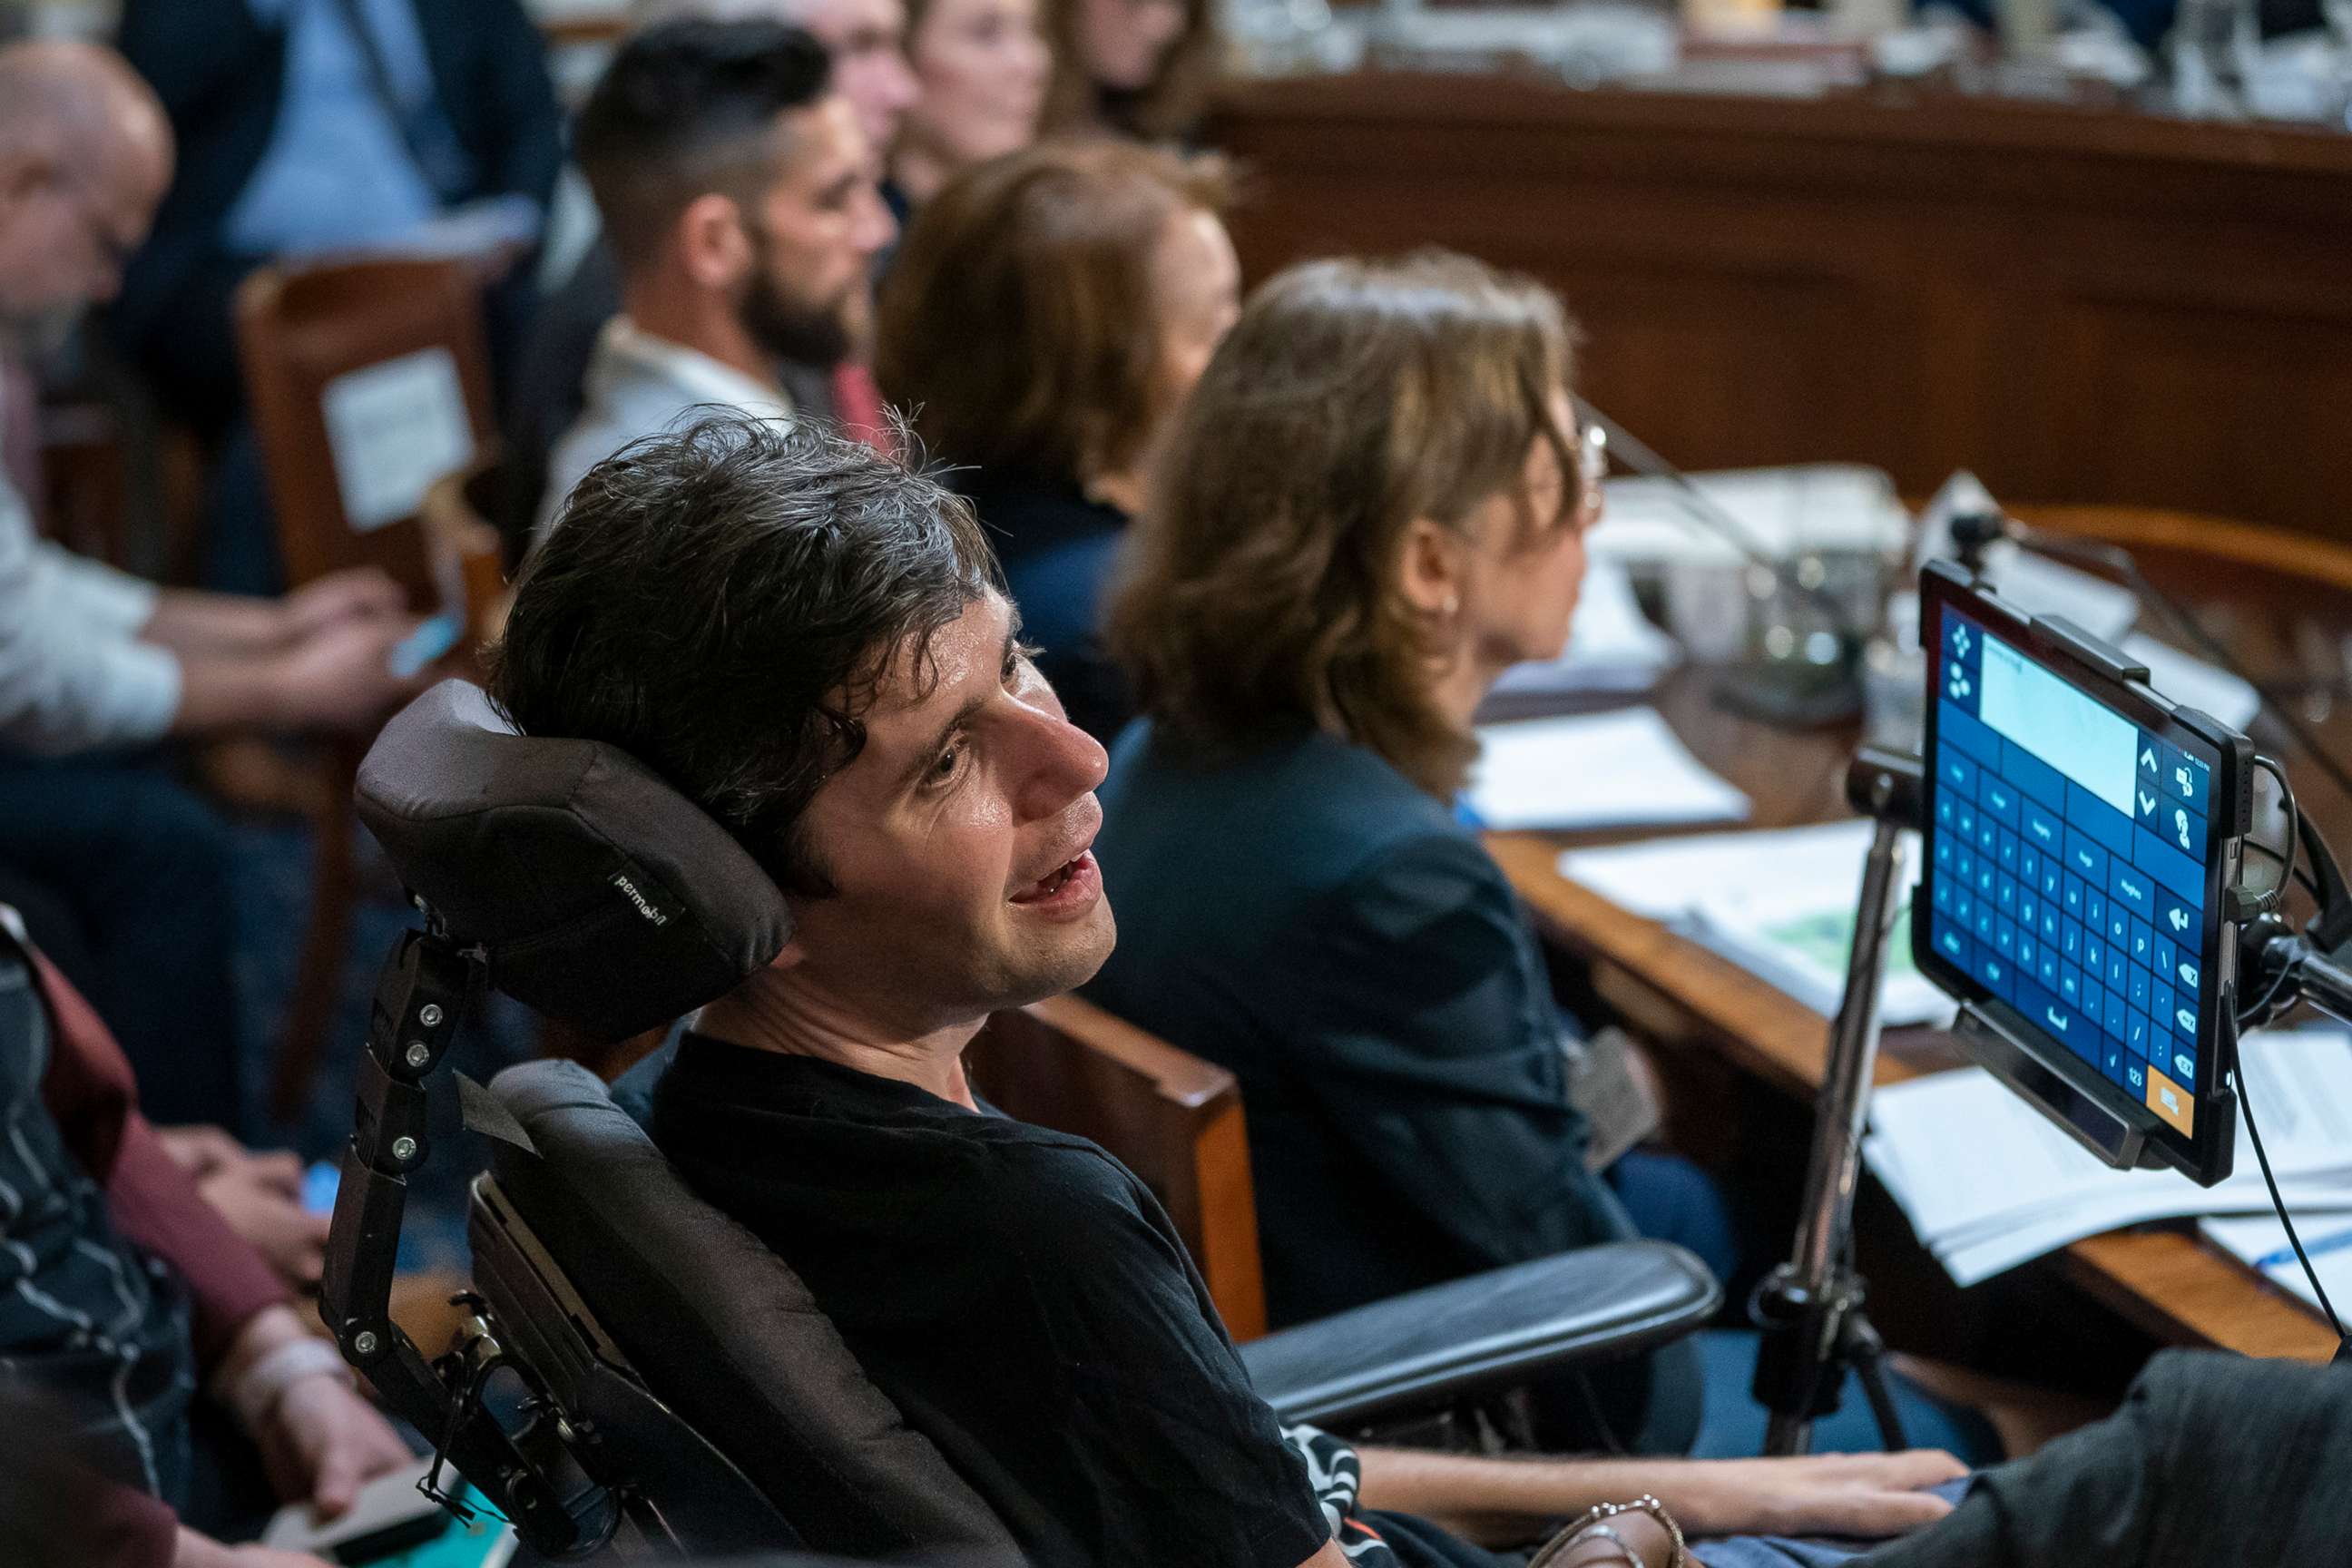 PHOTO: Ady Barkan, a high-profile health care activist who suffers from ALS, testifies before the House Rules Committee at a hearing on a "Medicare for All" bill for government-provided health care, on Capitol Hill in Washington, April 30, 2019.